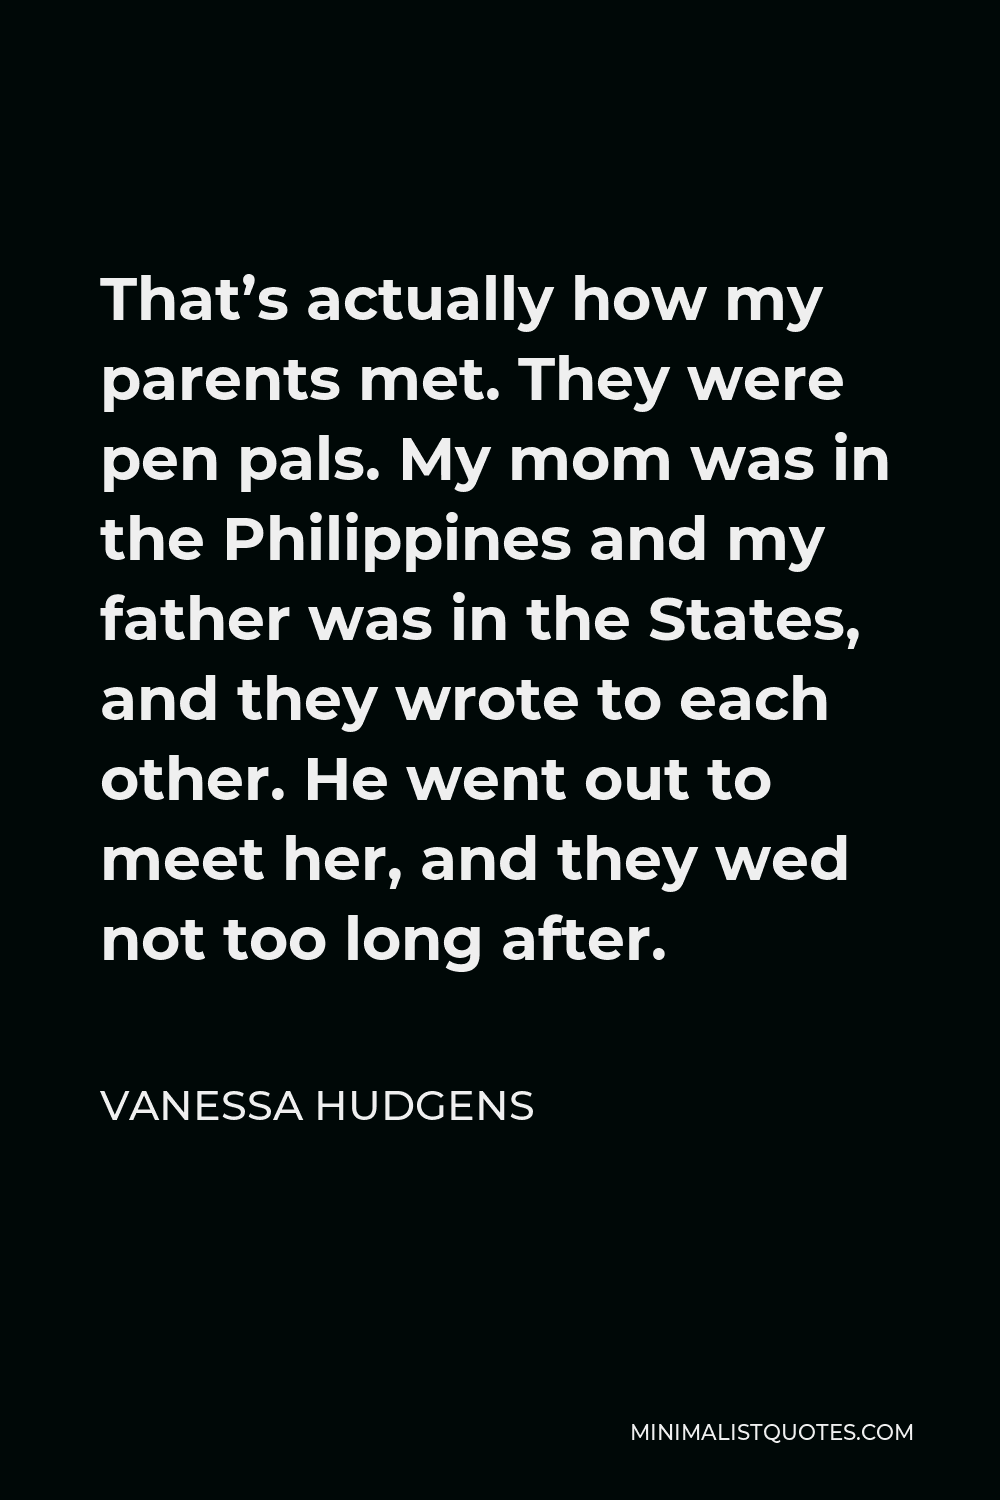 Vanessa Hudgens Quote - That’s actually how my parents met. They were pen pals. My mom was in the Philippines and my father was in the States, and they wrote to each other. He went out to meet her, and they wed not too long after.